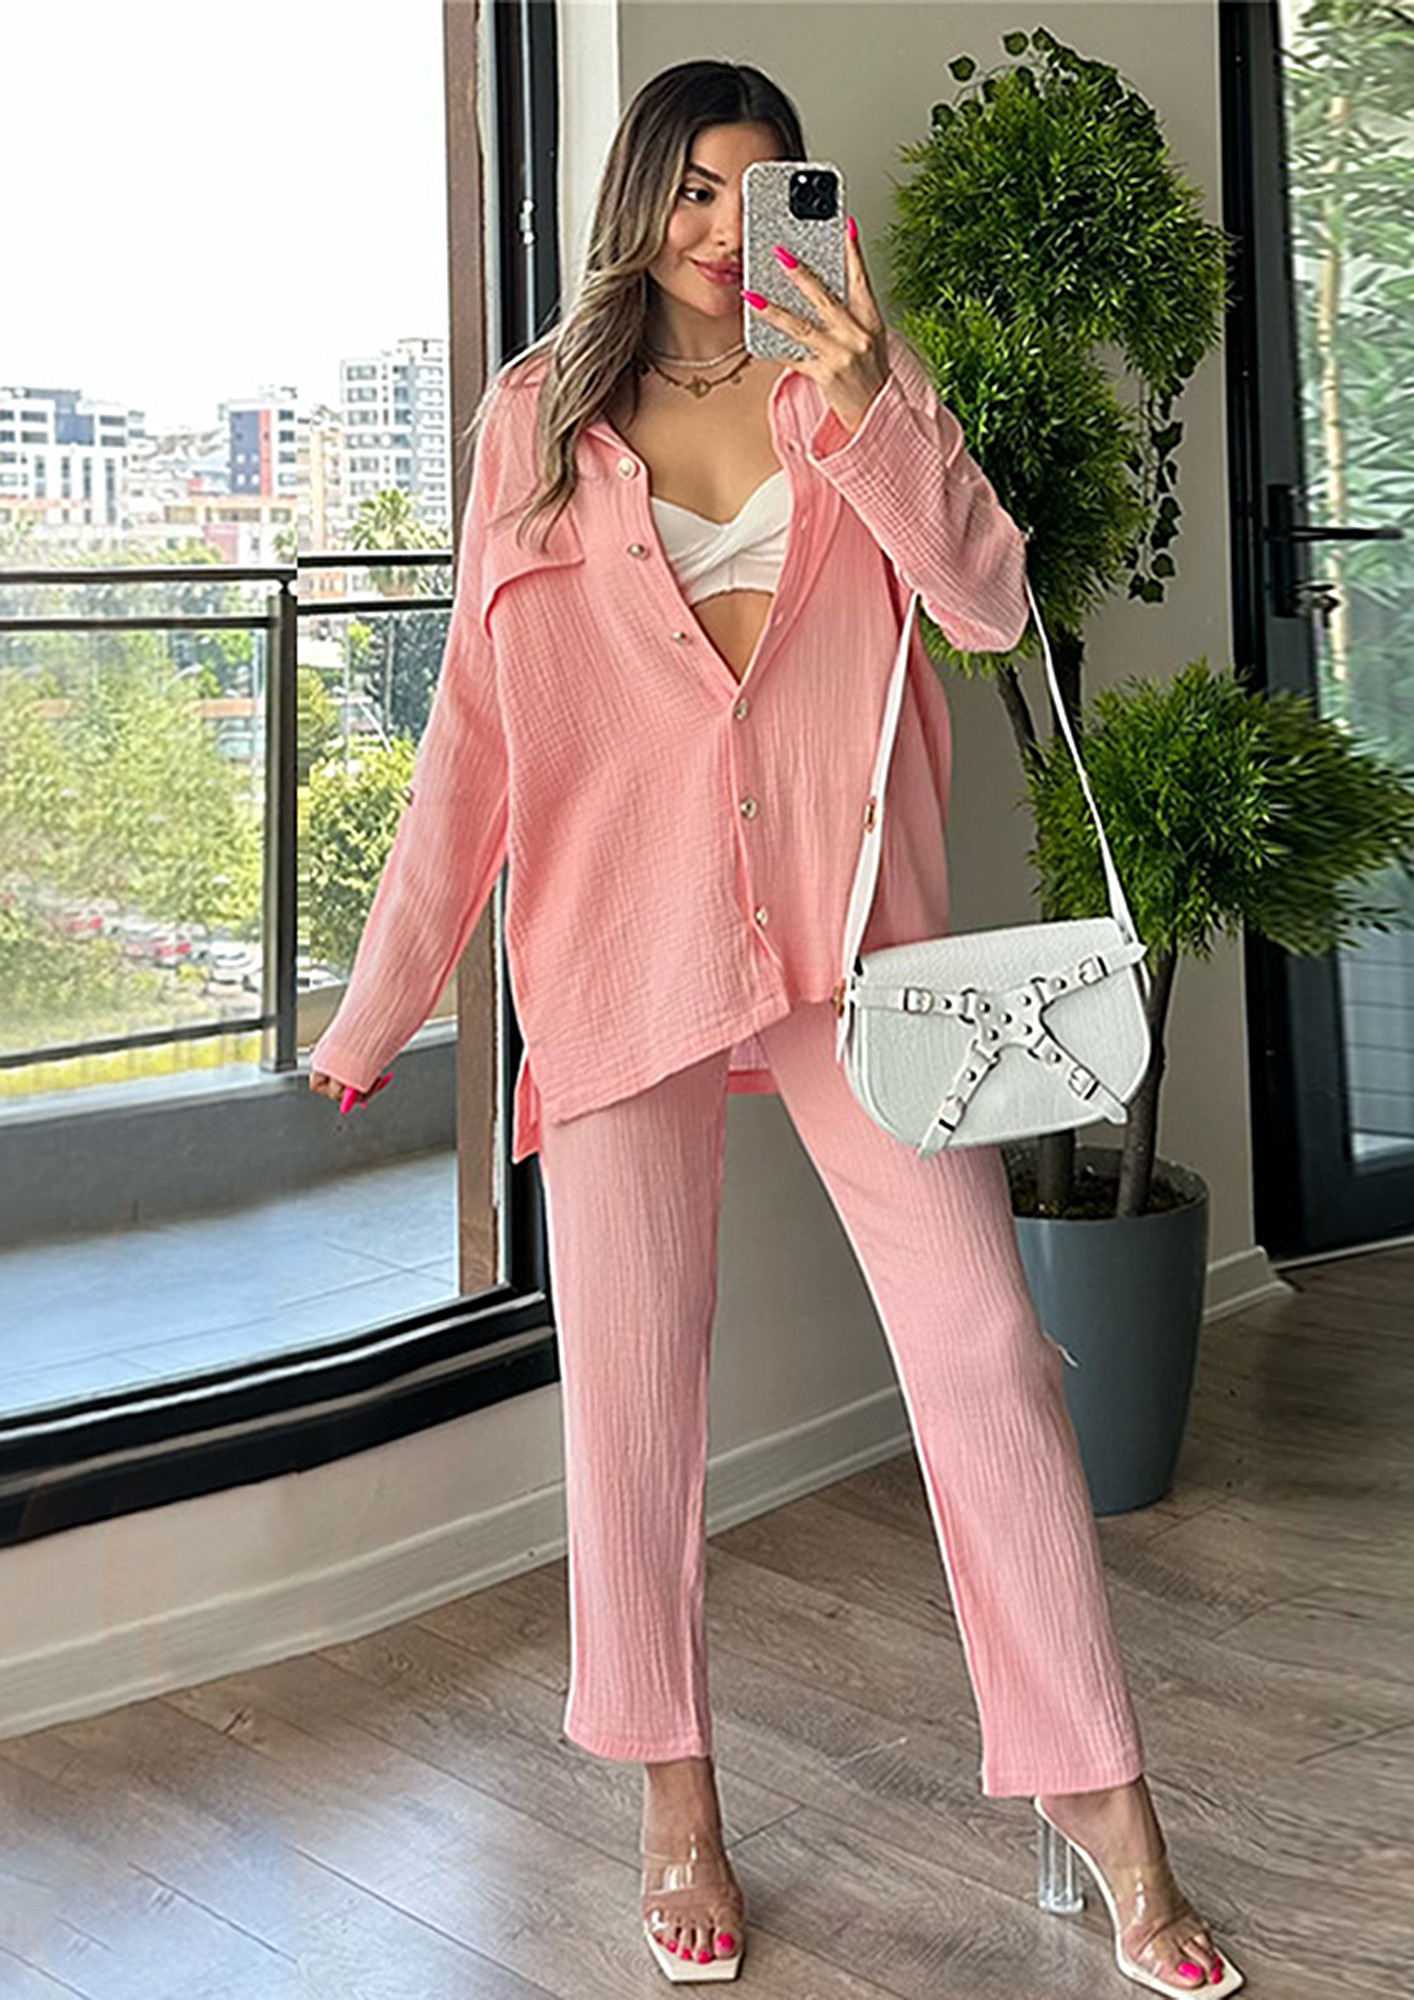 Stealing The Show High Waist Trousers In Hot Pink • Impressions Online  Boutique | Hot pink pants, Pink trousers outfit, Flare dress pants